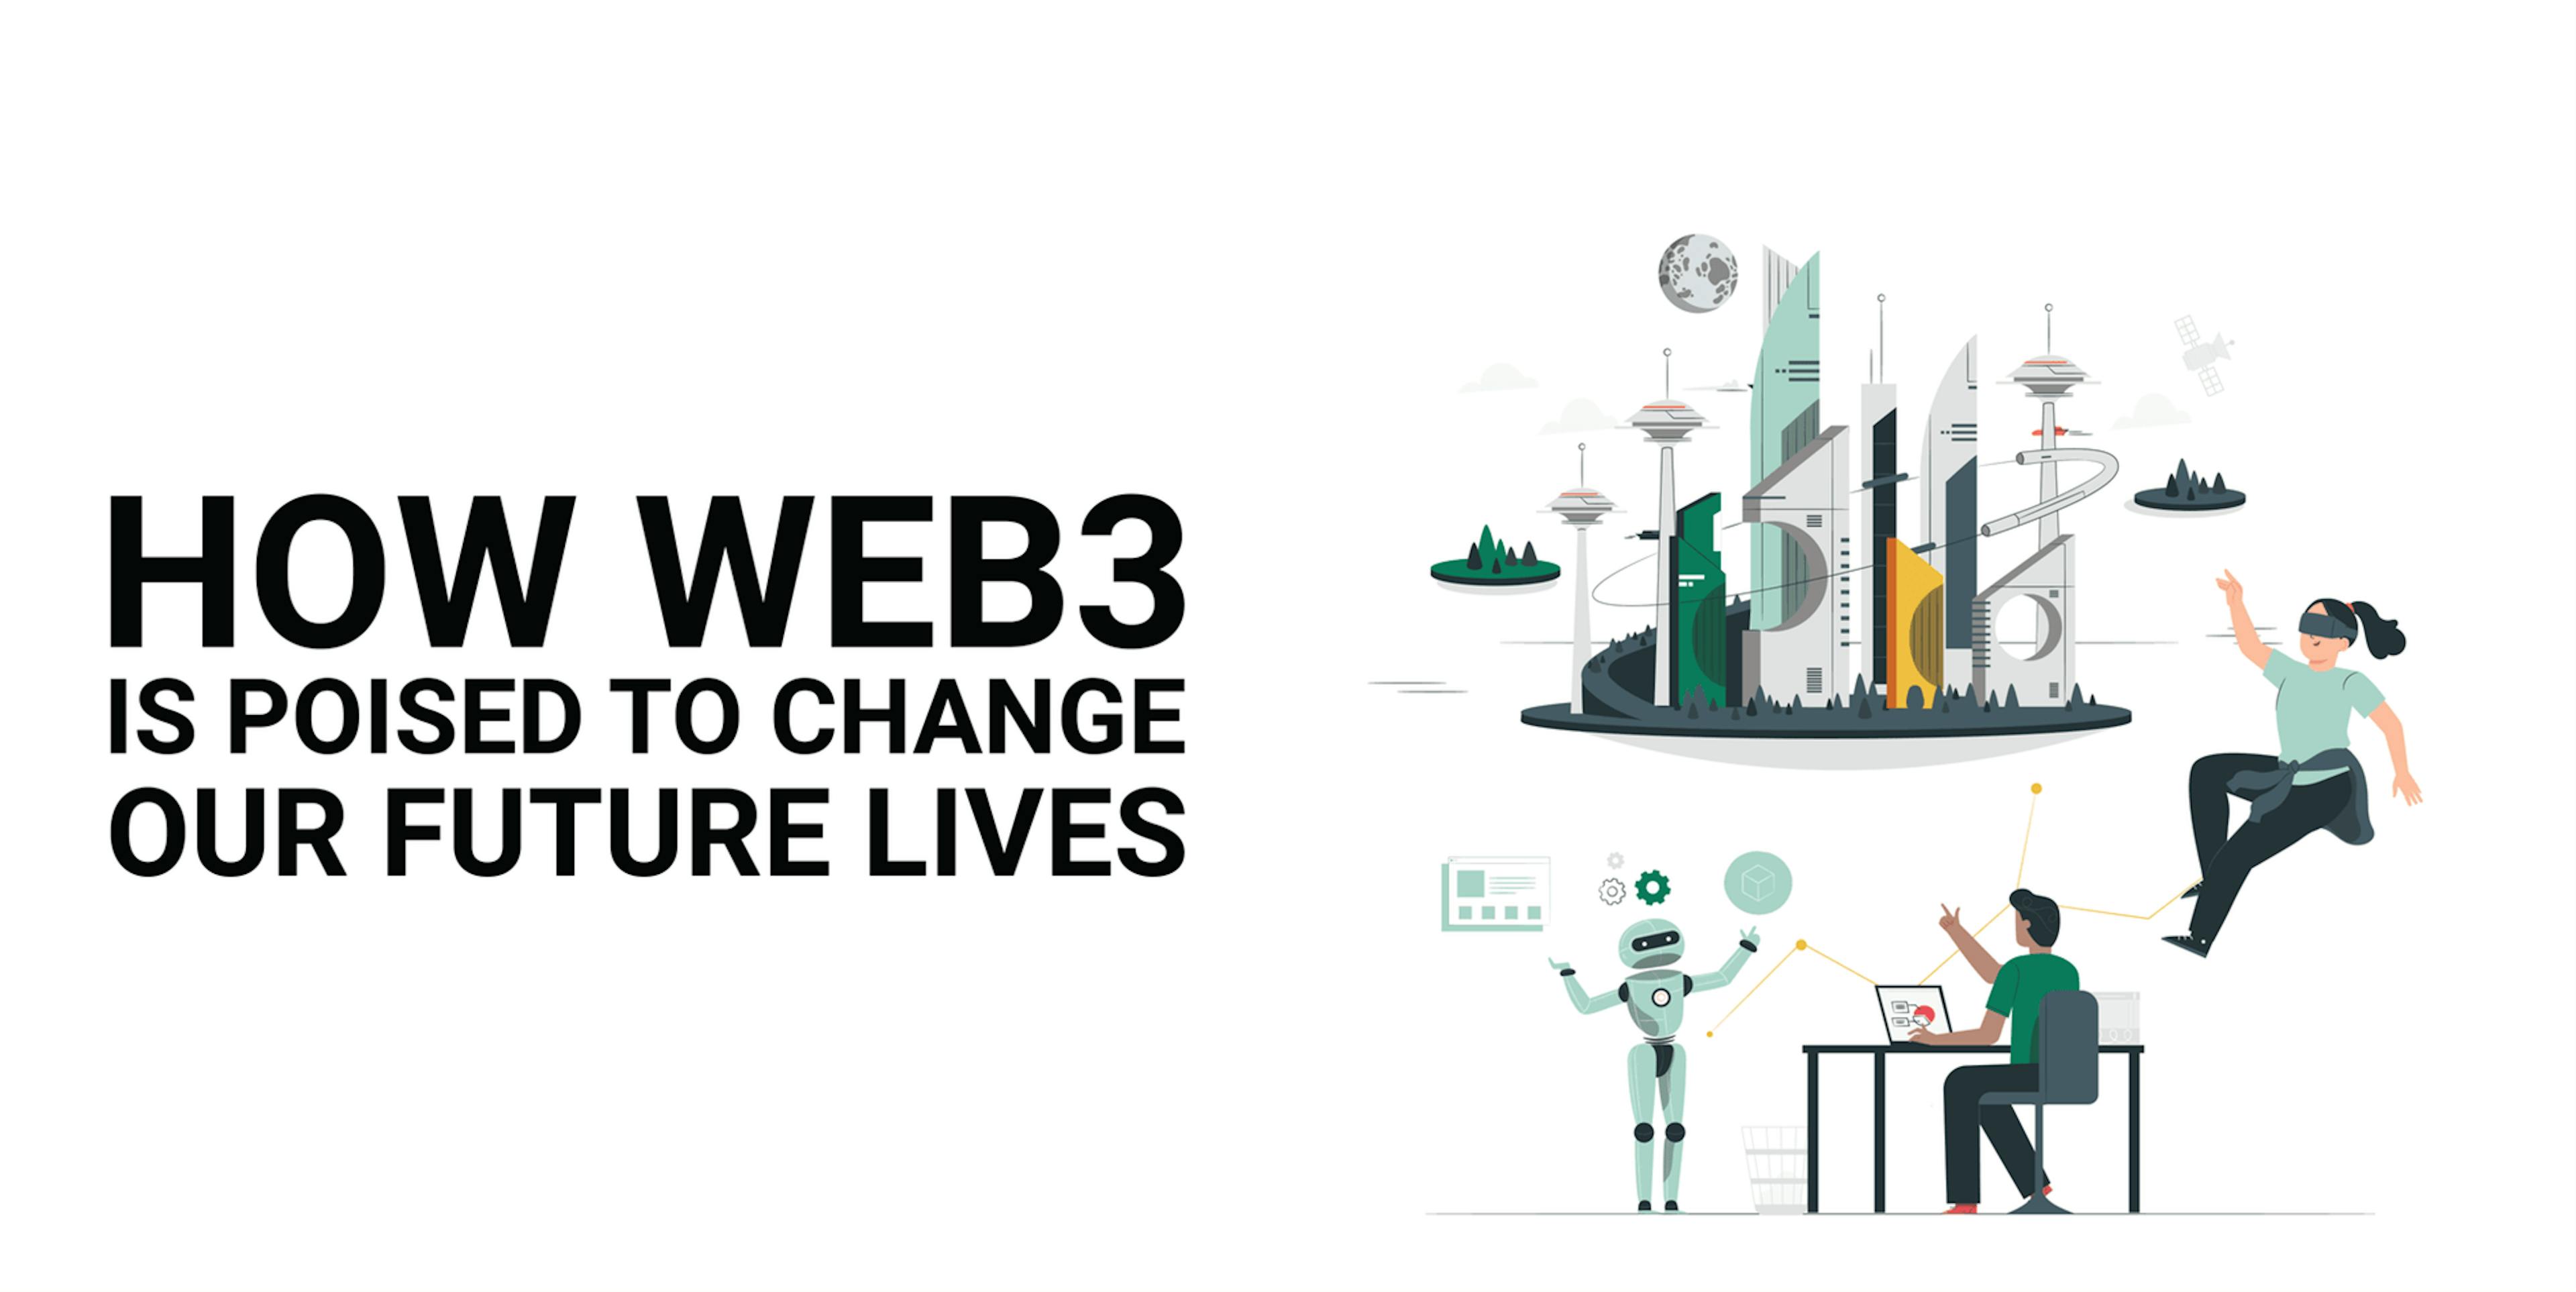 Web3 is set to revolutionize blockchain and other emerging technologies